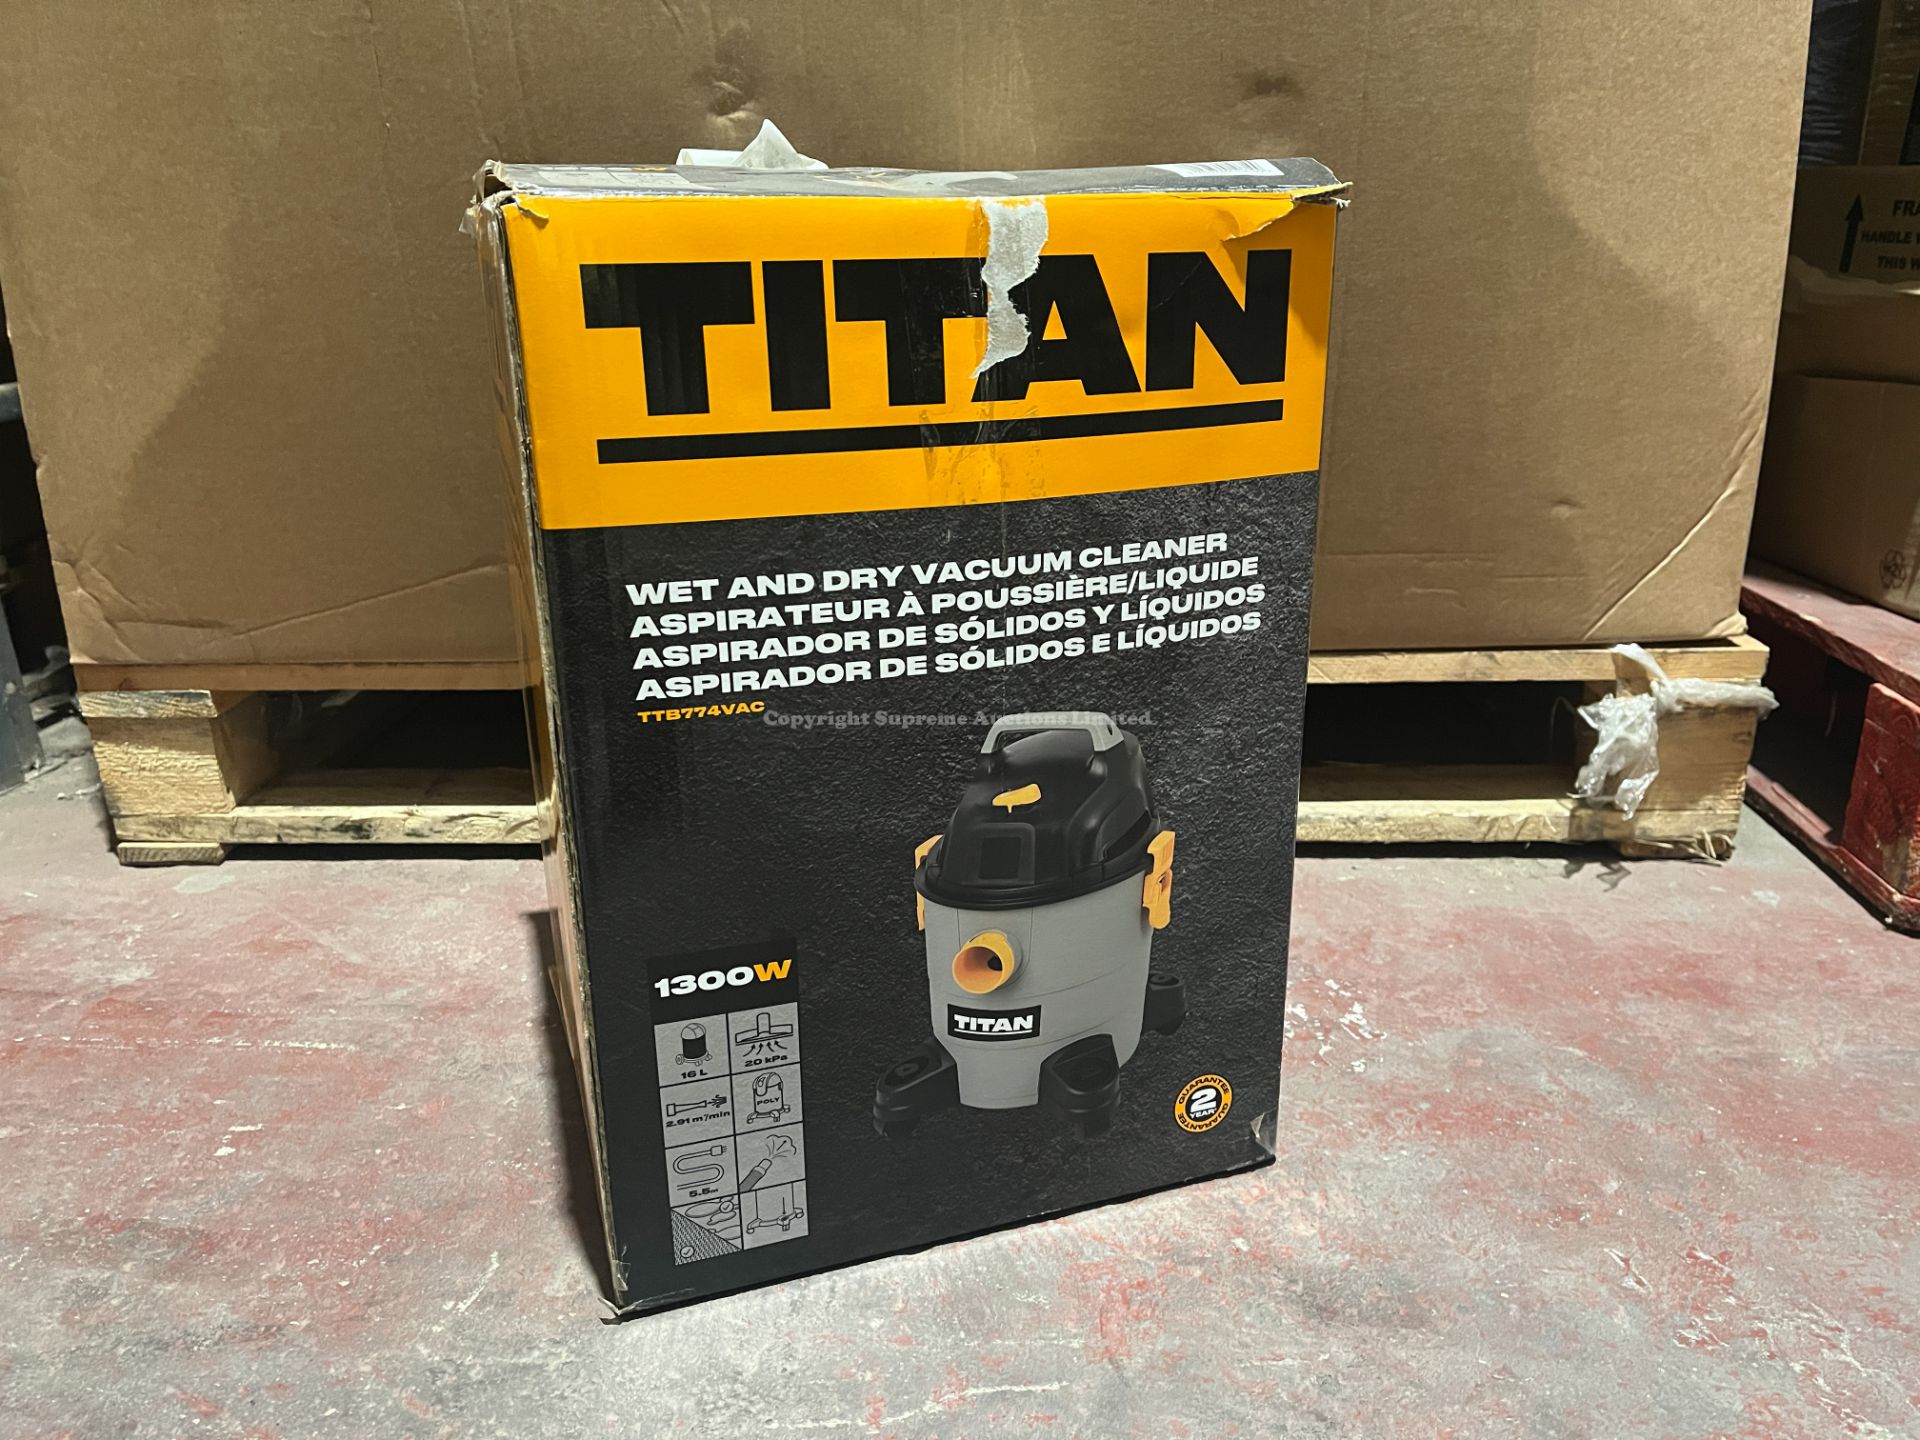 2 X TITAN WET AND DRY CANISTER VACUUMS R12-15